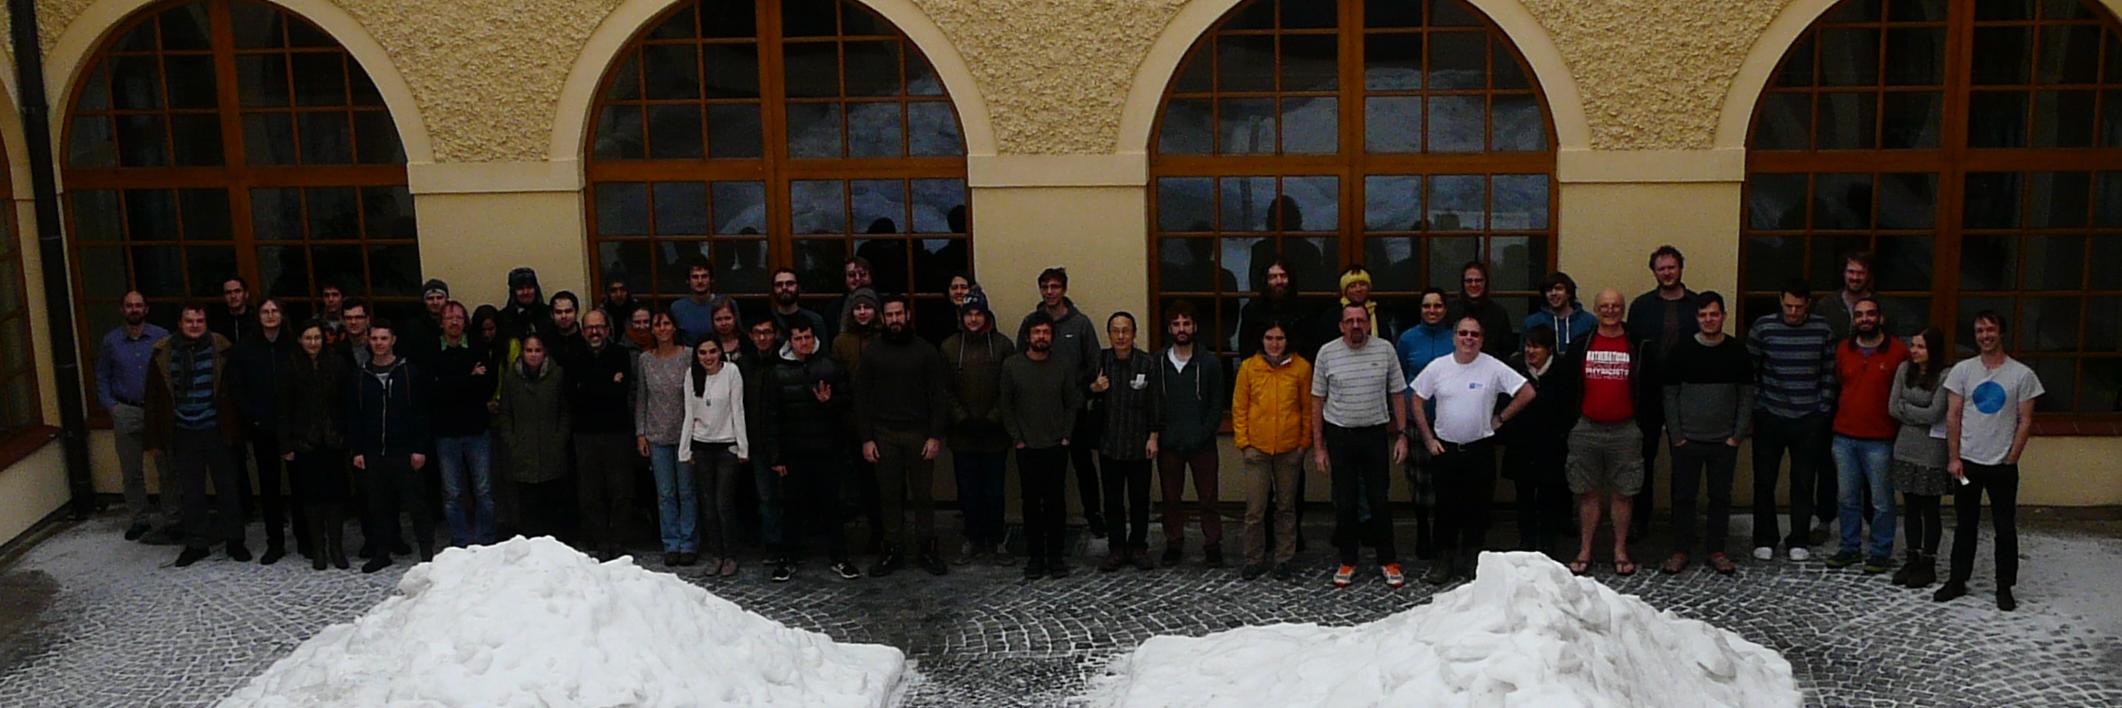 Group photo of the participants of the WS 2017